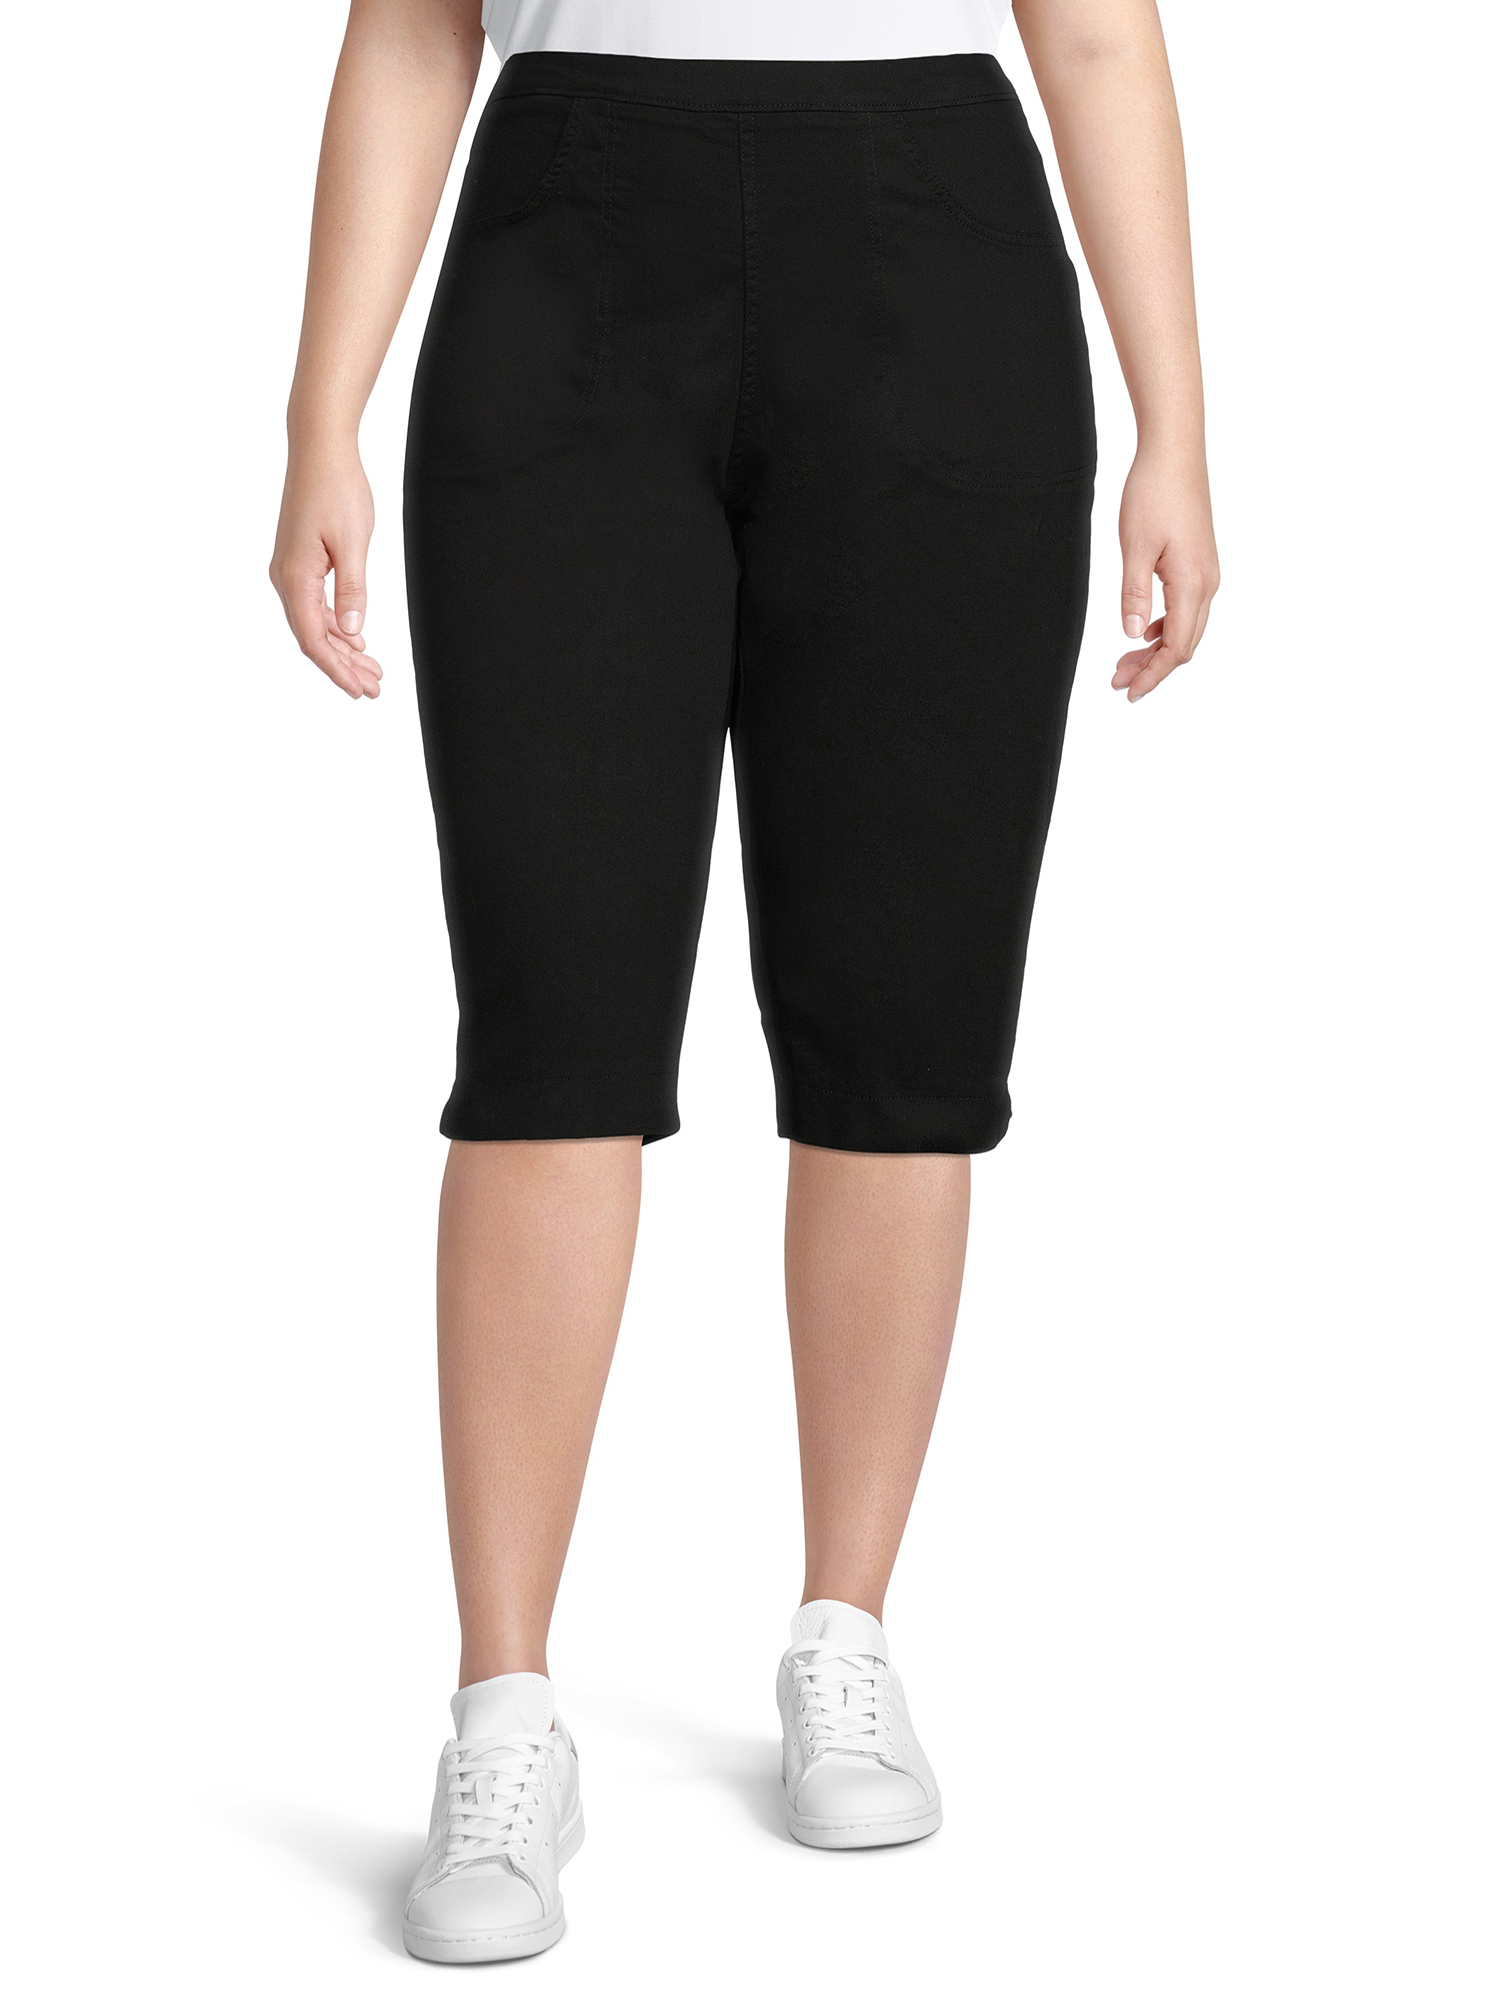 Just My Size Women's Plus Size Pull On 2 Pocket Stretch Capri - image 1 of 6